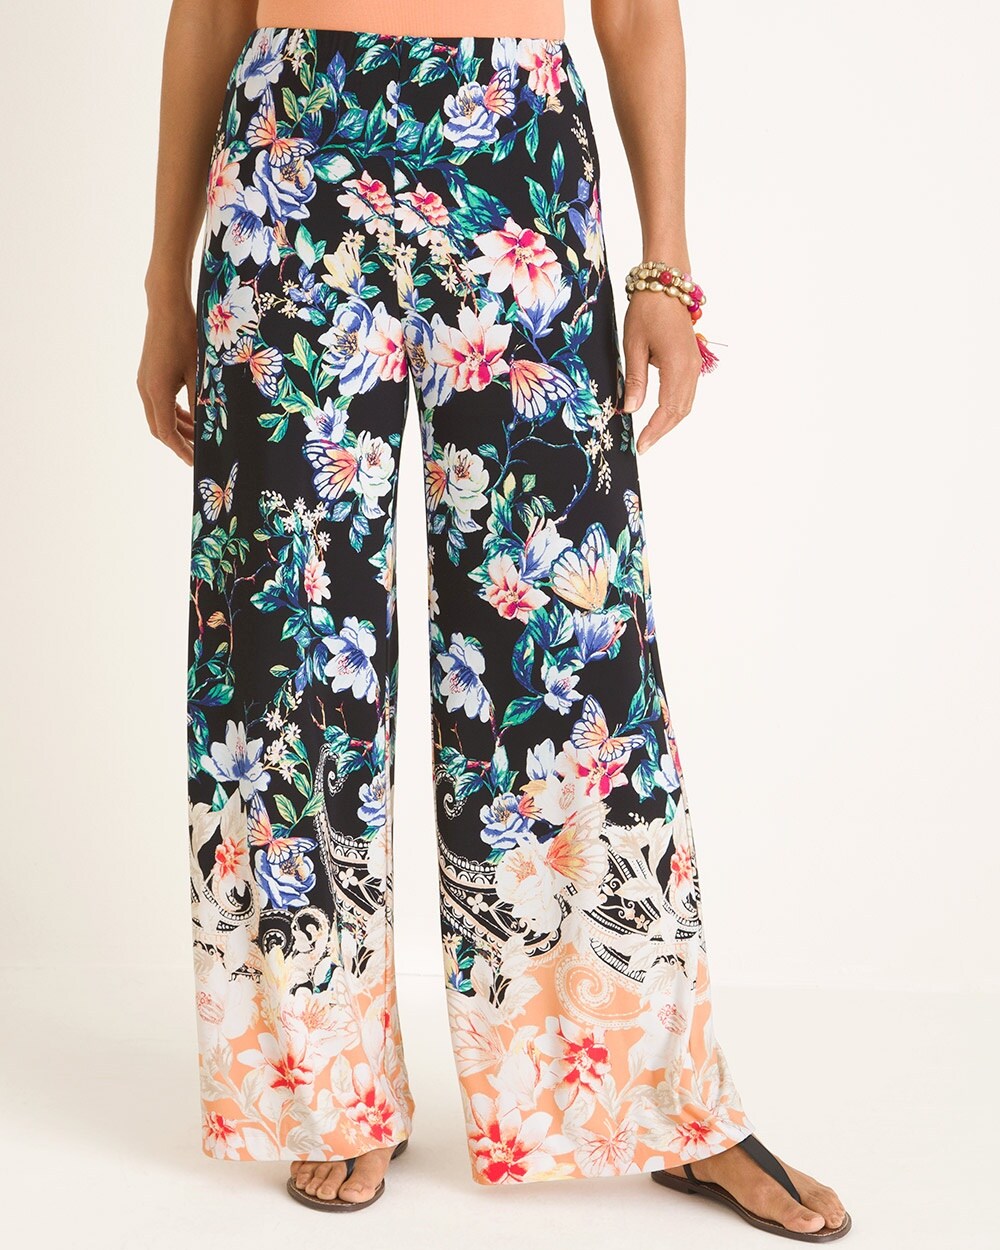 Butterfly Garden-Print Palazzo Pants